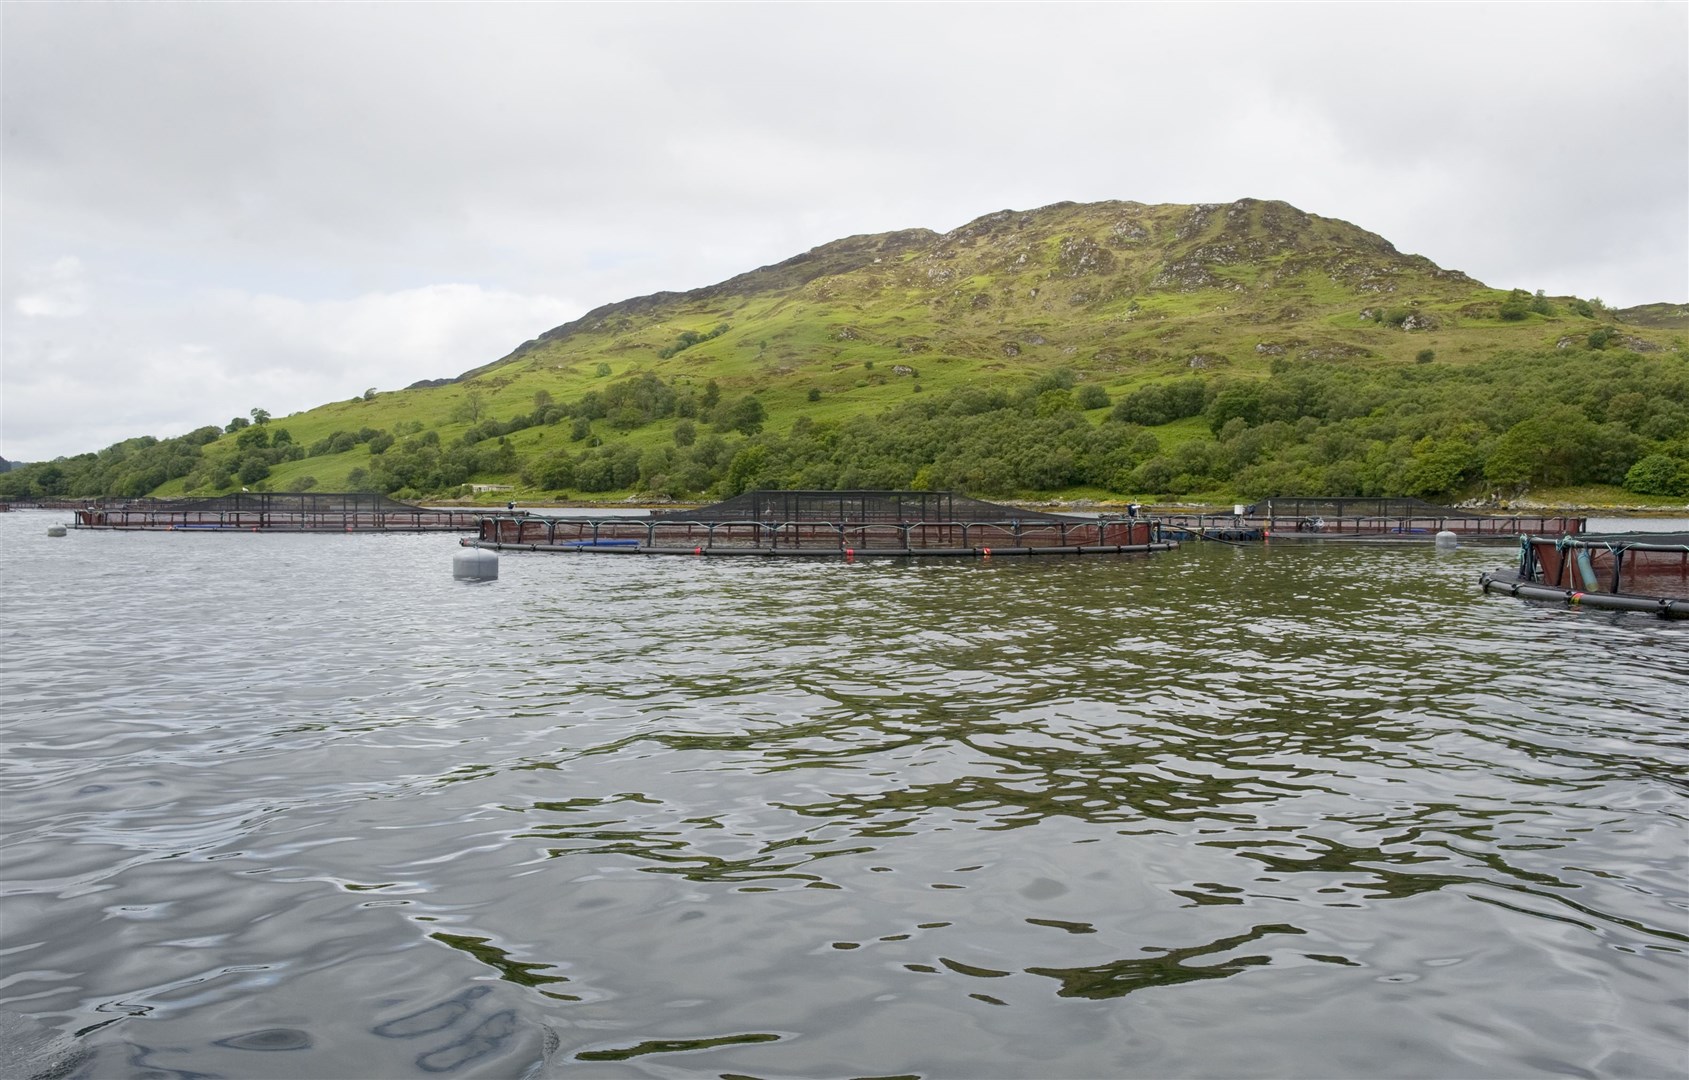 The Scottish Salmon Company also operates fish farms in Sheildaig, Loch Torridon, as well as Argyll, Mull and the Western Isles.